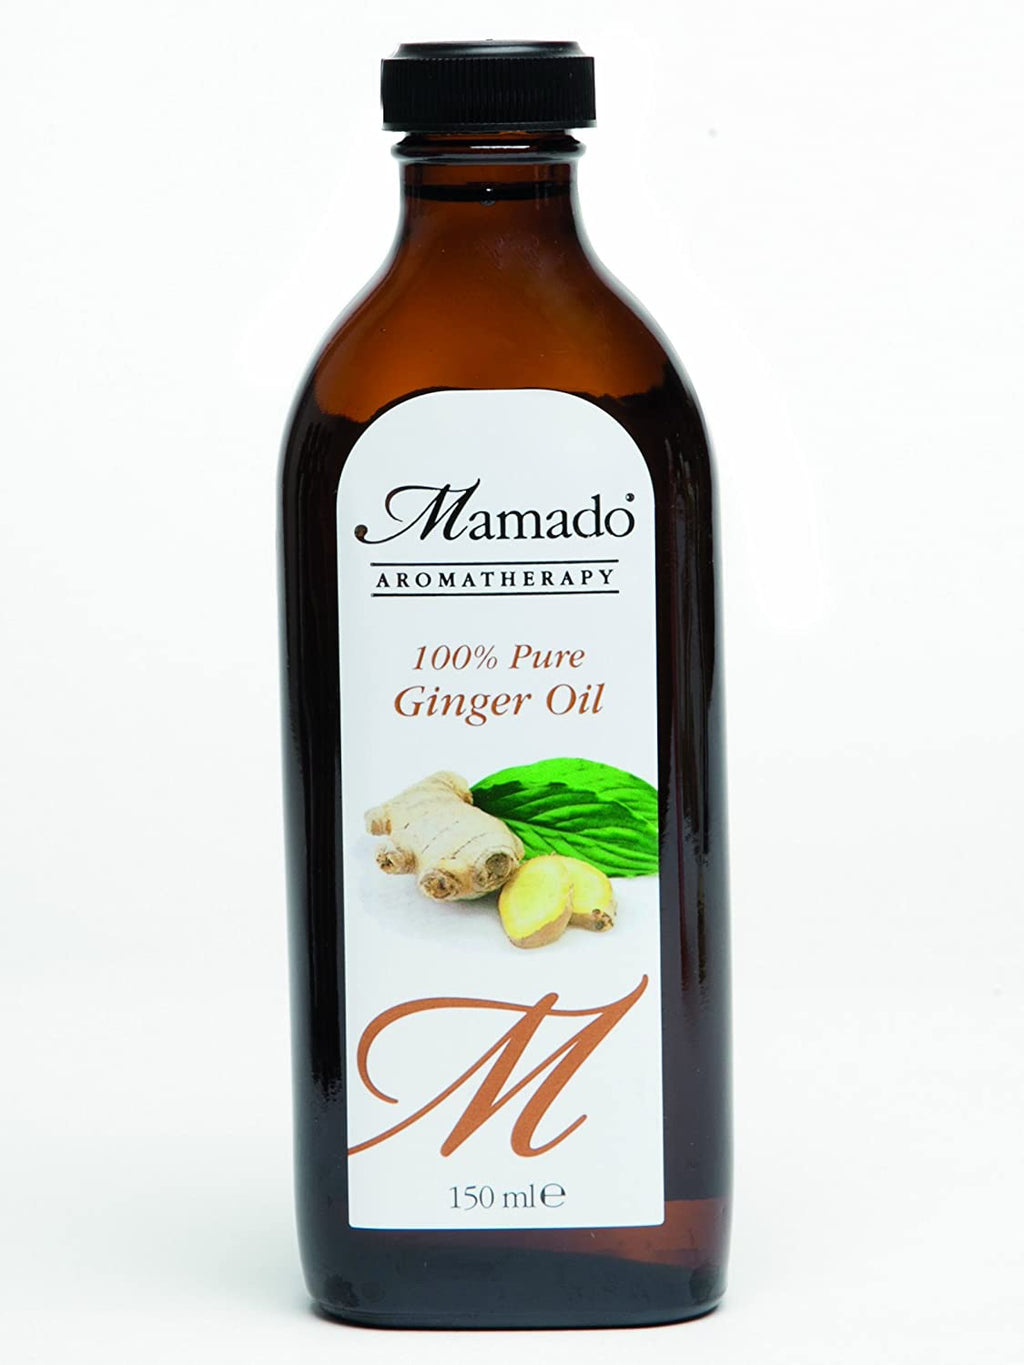 Mamado' - Aromatherapy 100% Pure Ginger Oil